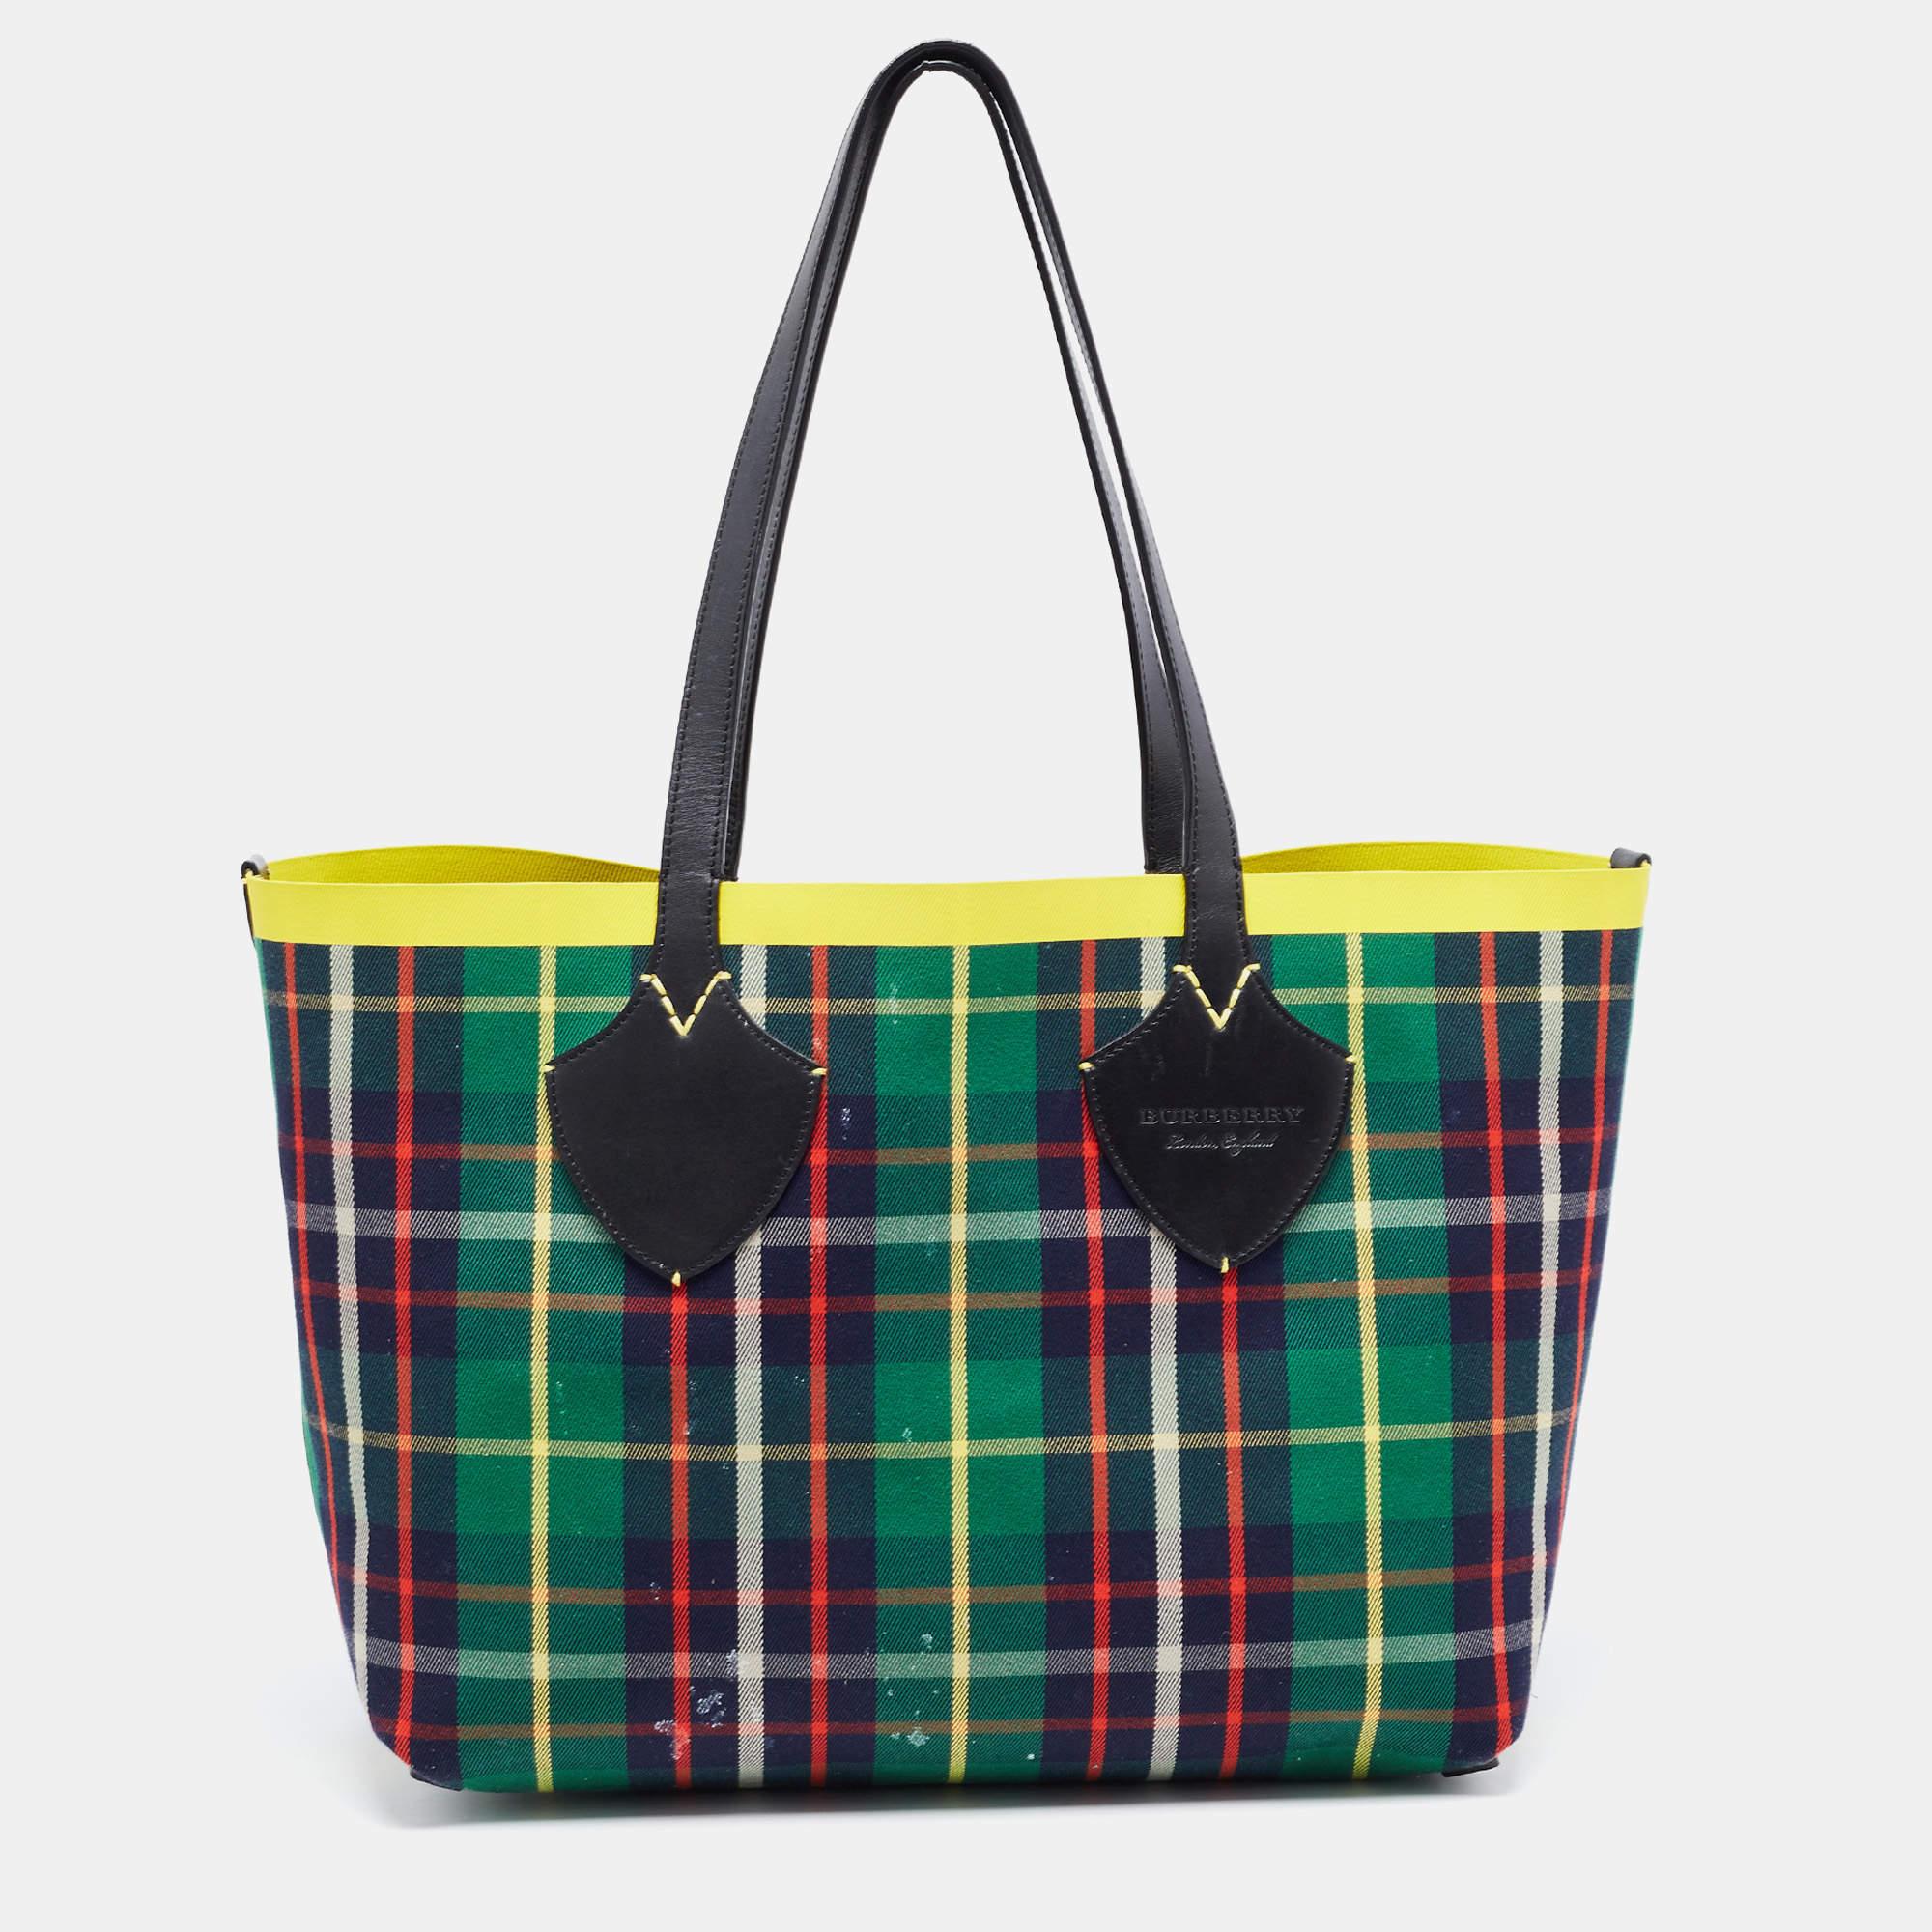 This Reversible tote by Burberry has a structure that simply spells ease. Crafted from check canvas, the bag is elegantly held by two leather handles. The tote comes with a reversible interior with enough space to store your necessities.

